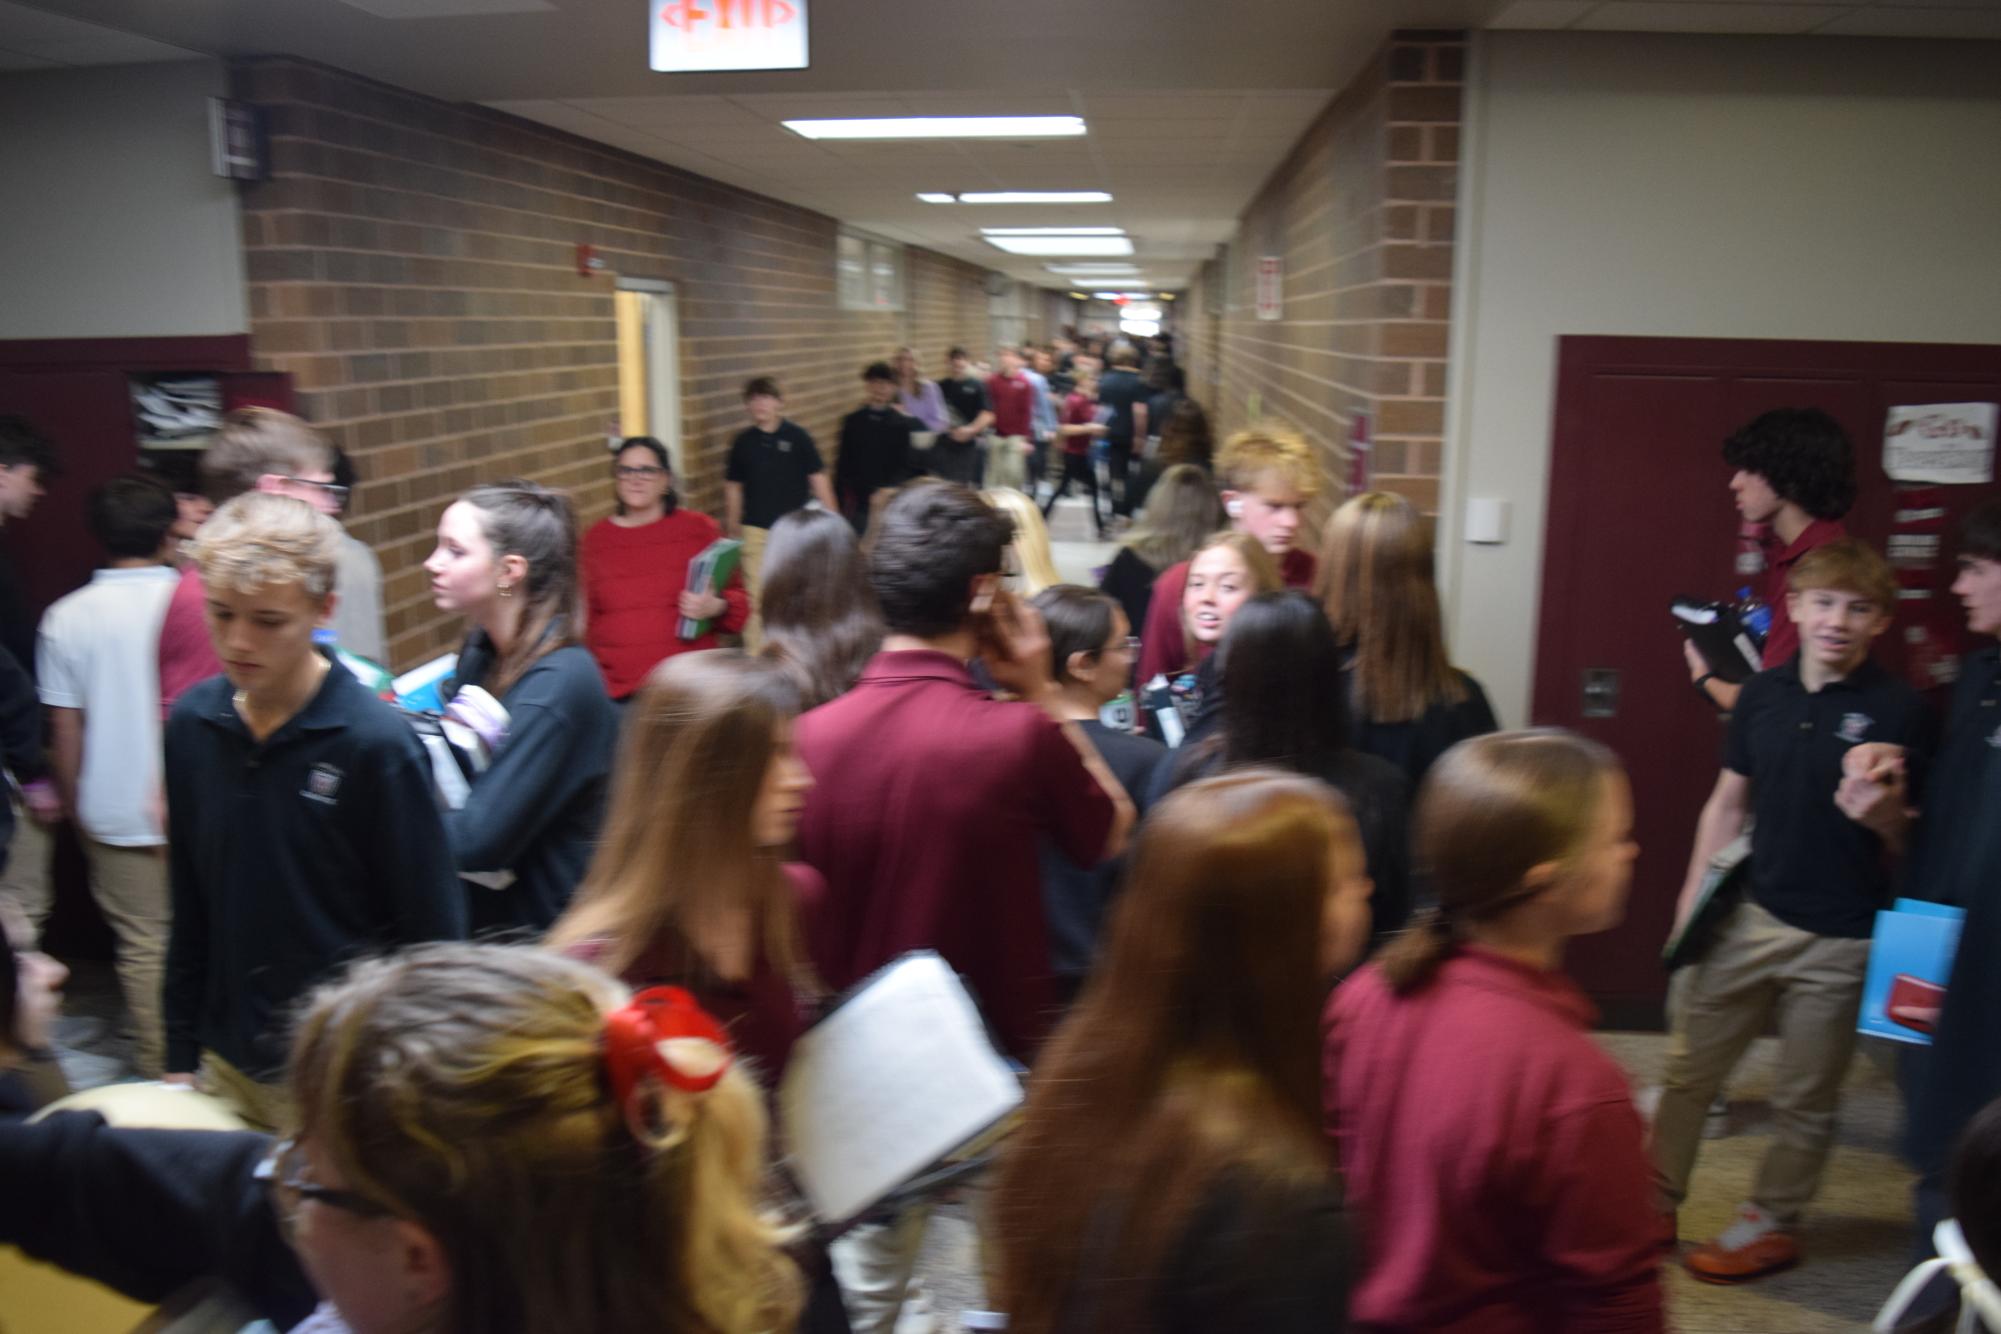 Students and teachers move through the hallways on a busy Tuesday afternoon.